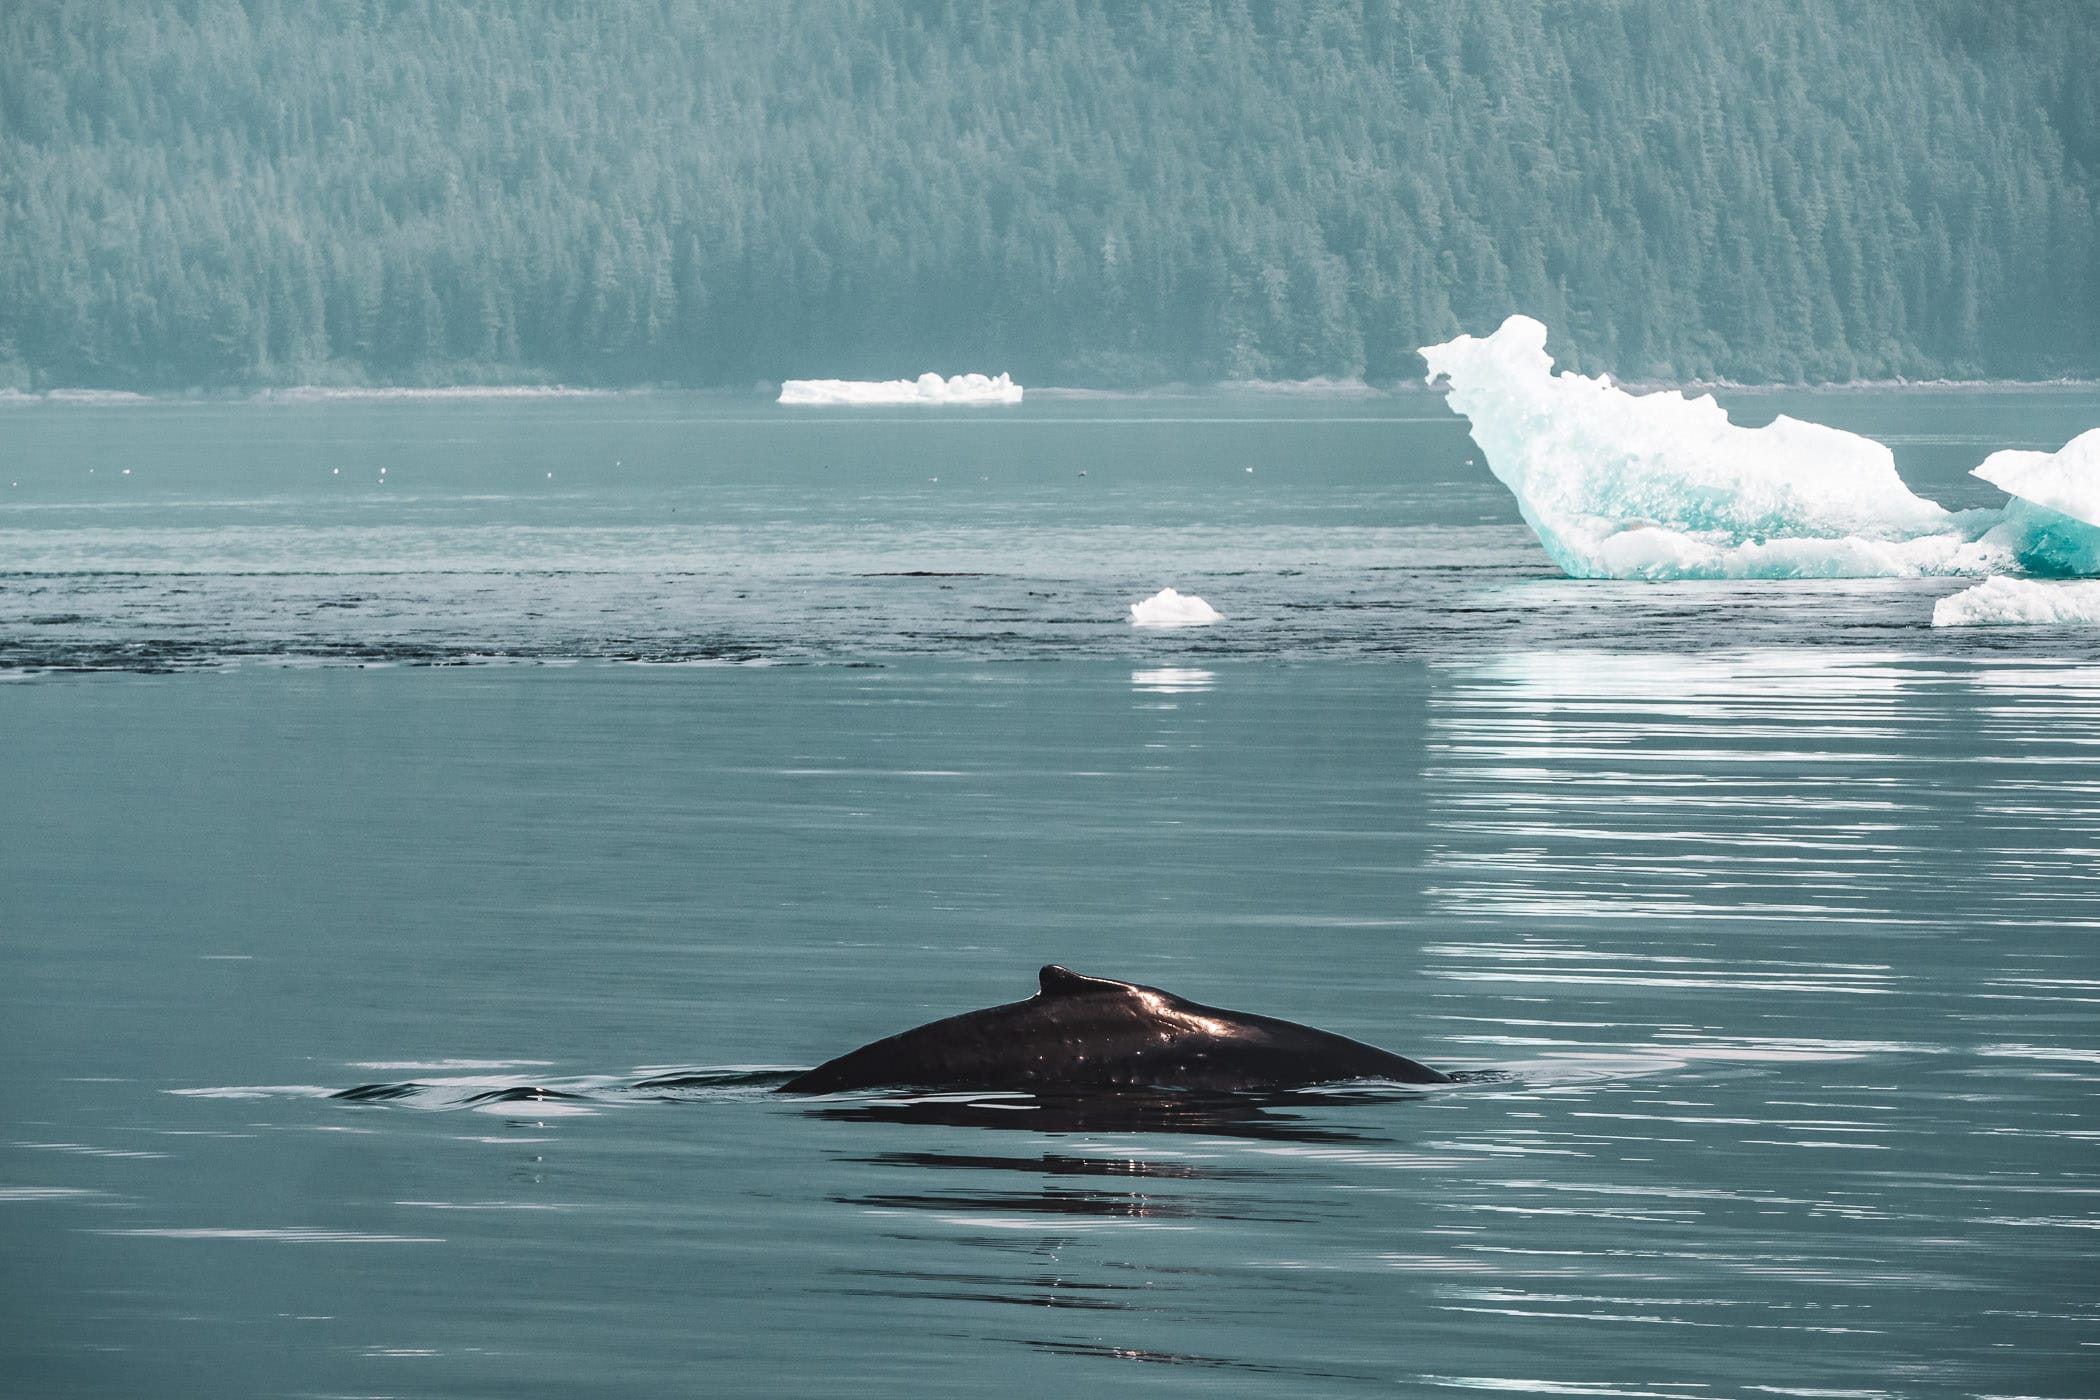 A humpback whale breaches the surface of Alaska's Stephens Passage south of Juneau.